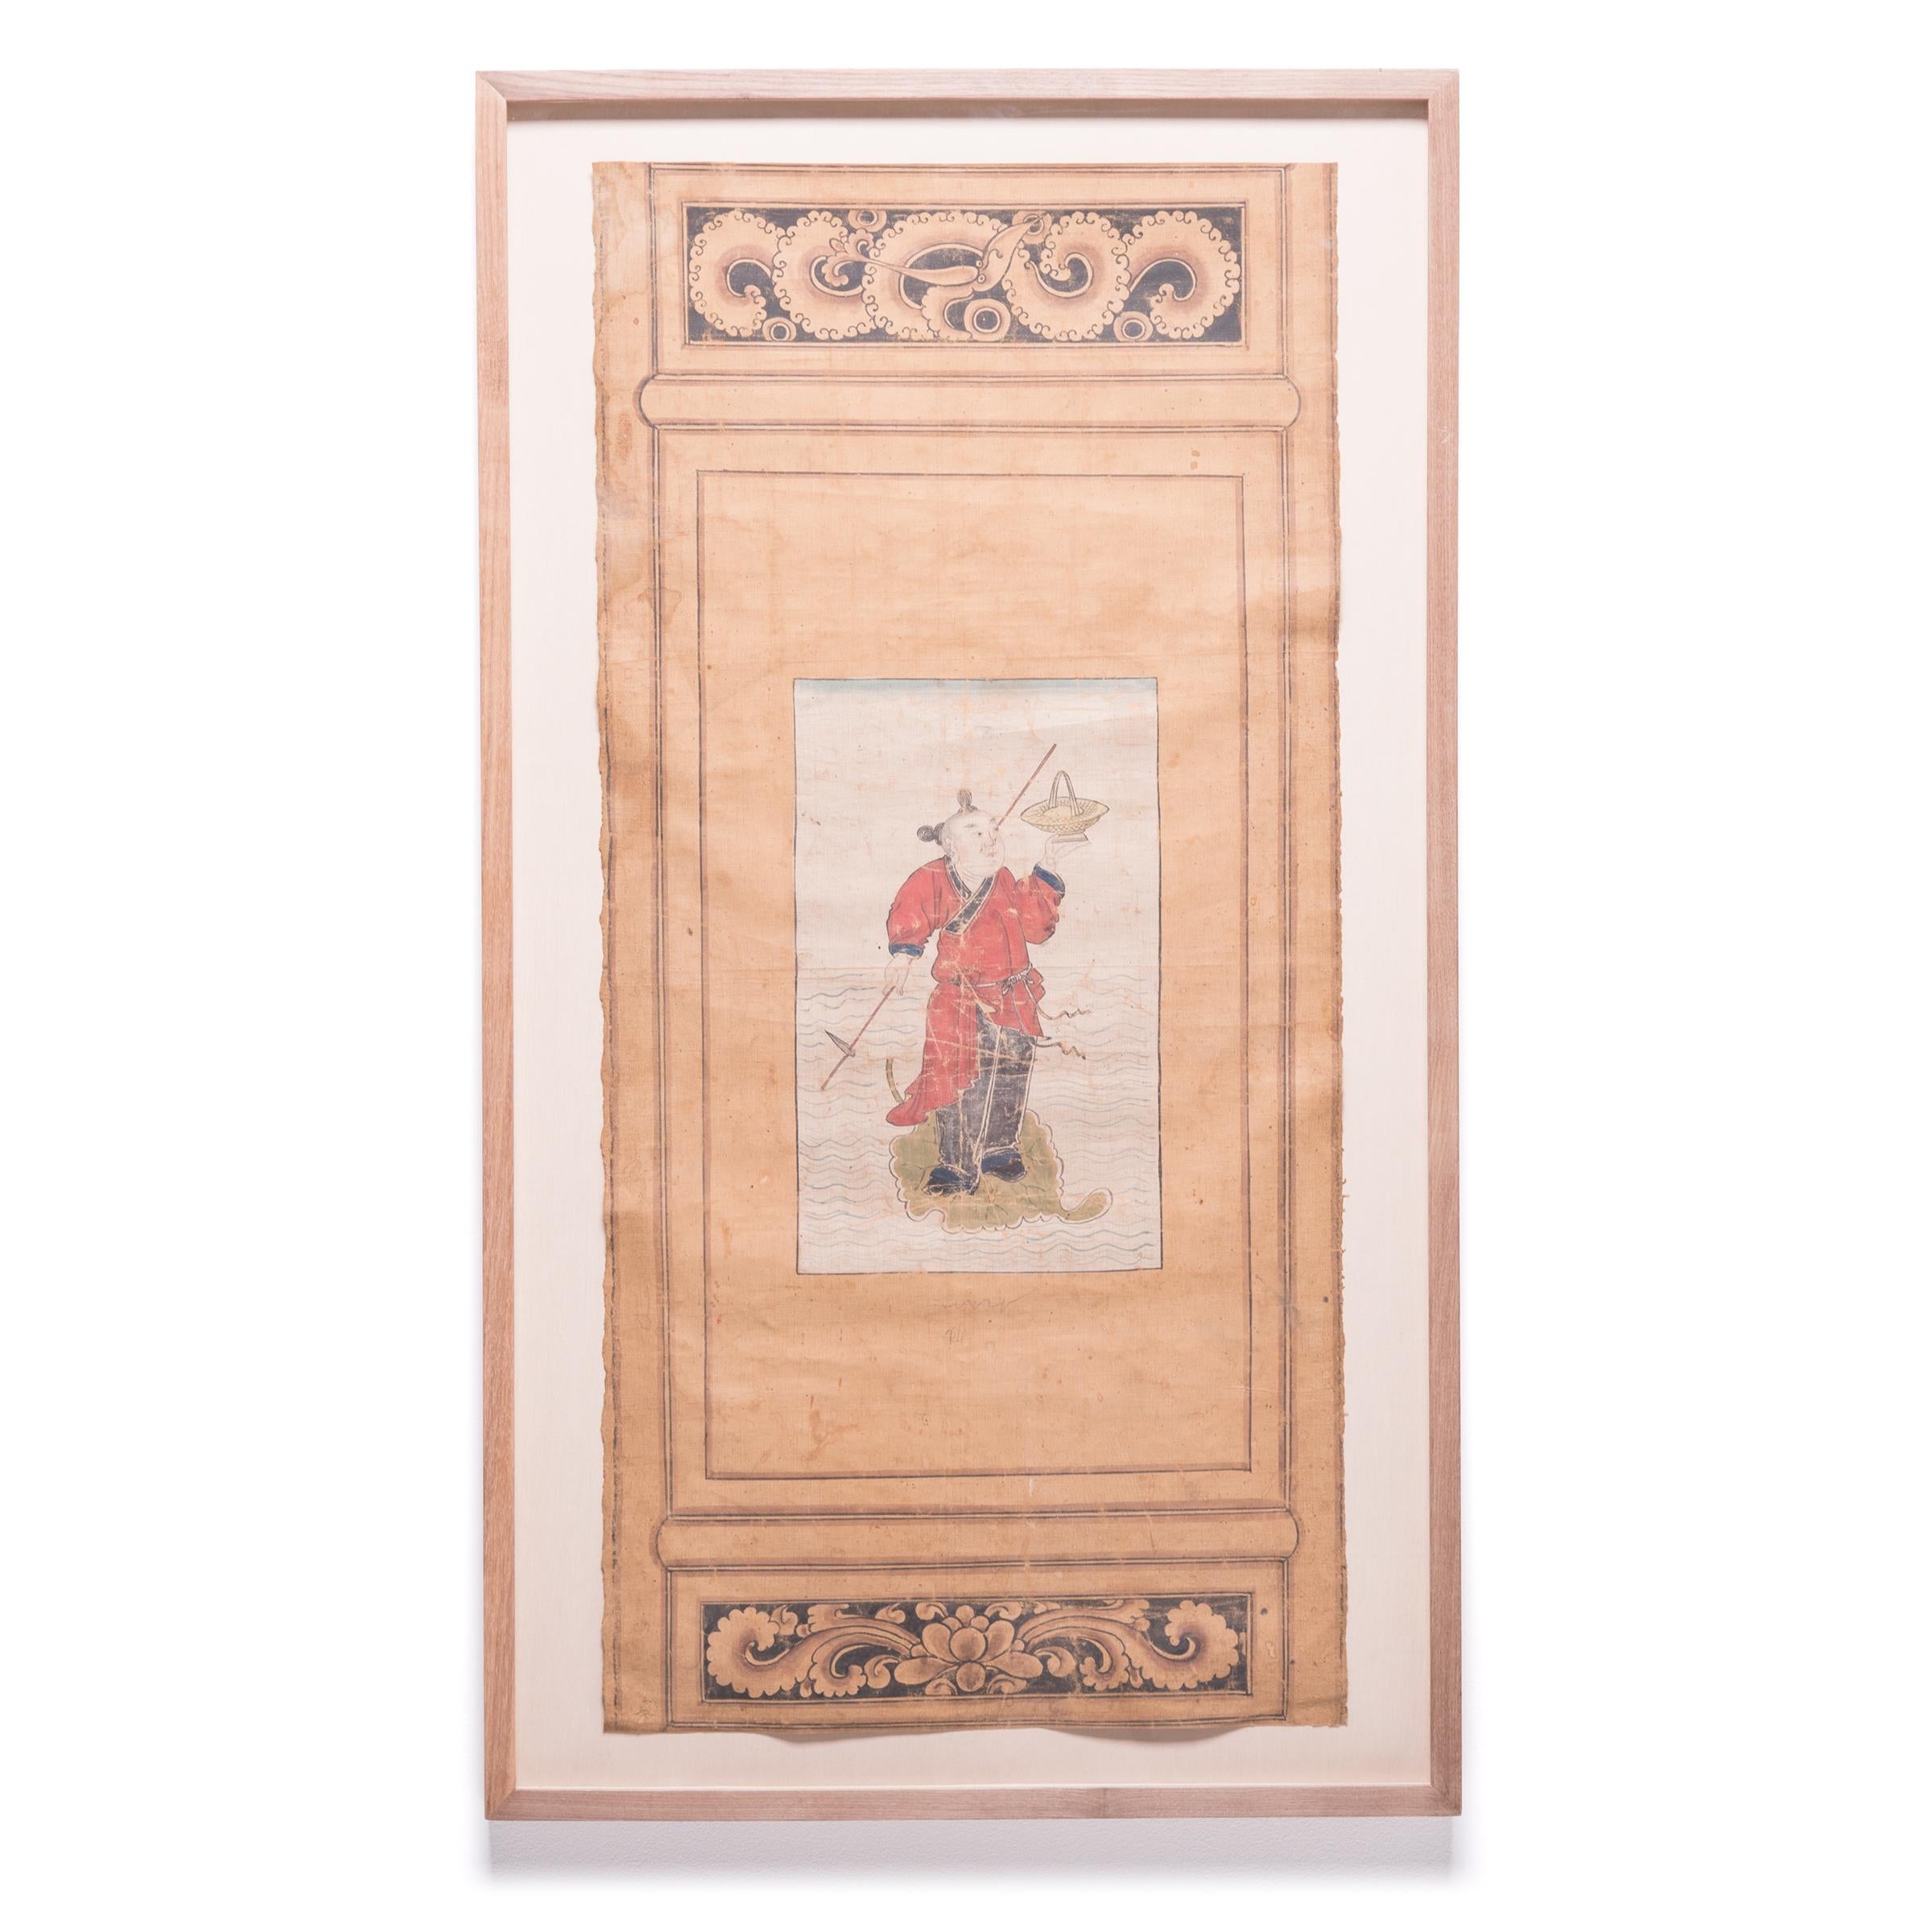 Hand-Painted Set of Four Chinese Immortals Screen Paintings, c. 1850 For Sale